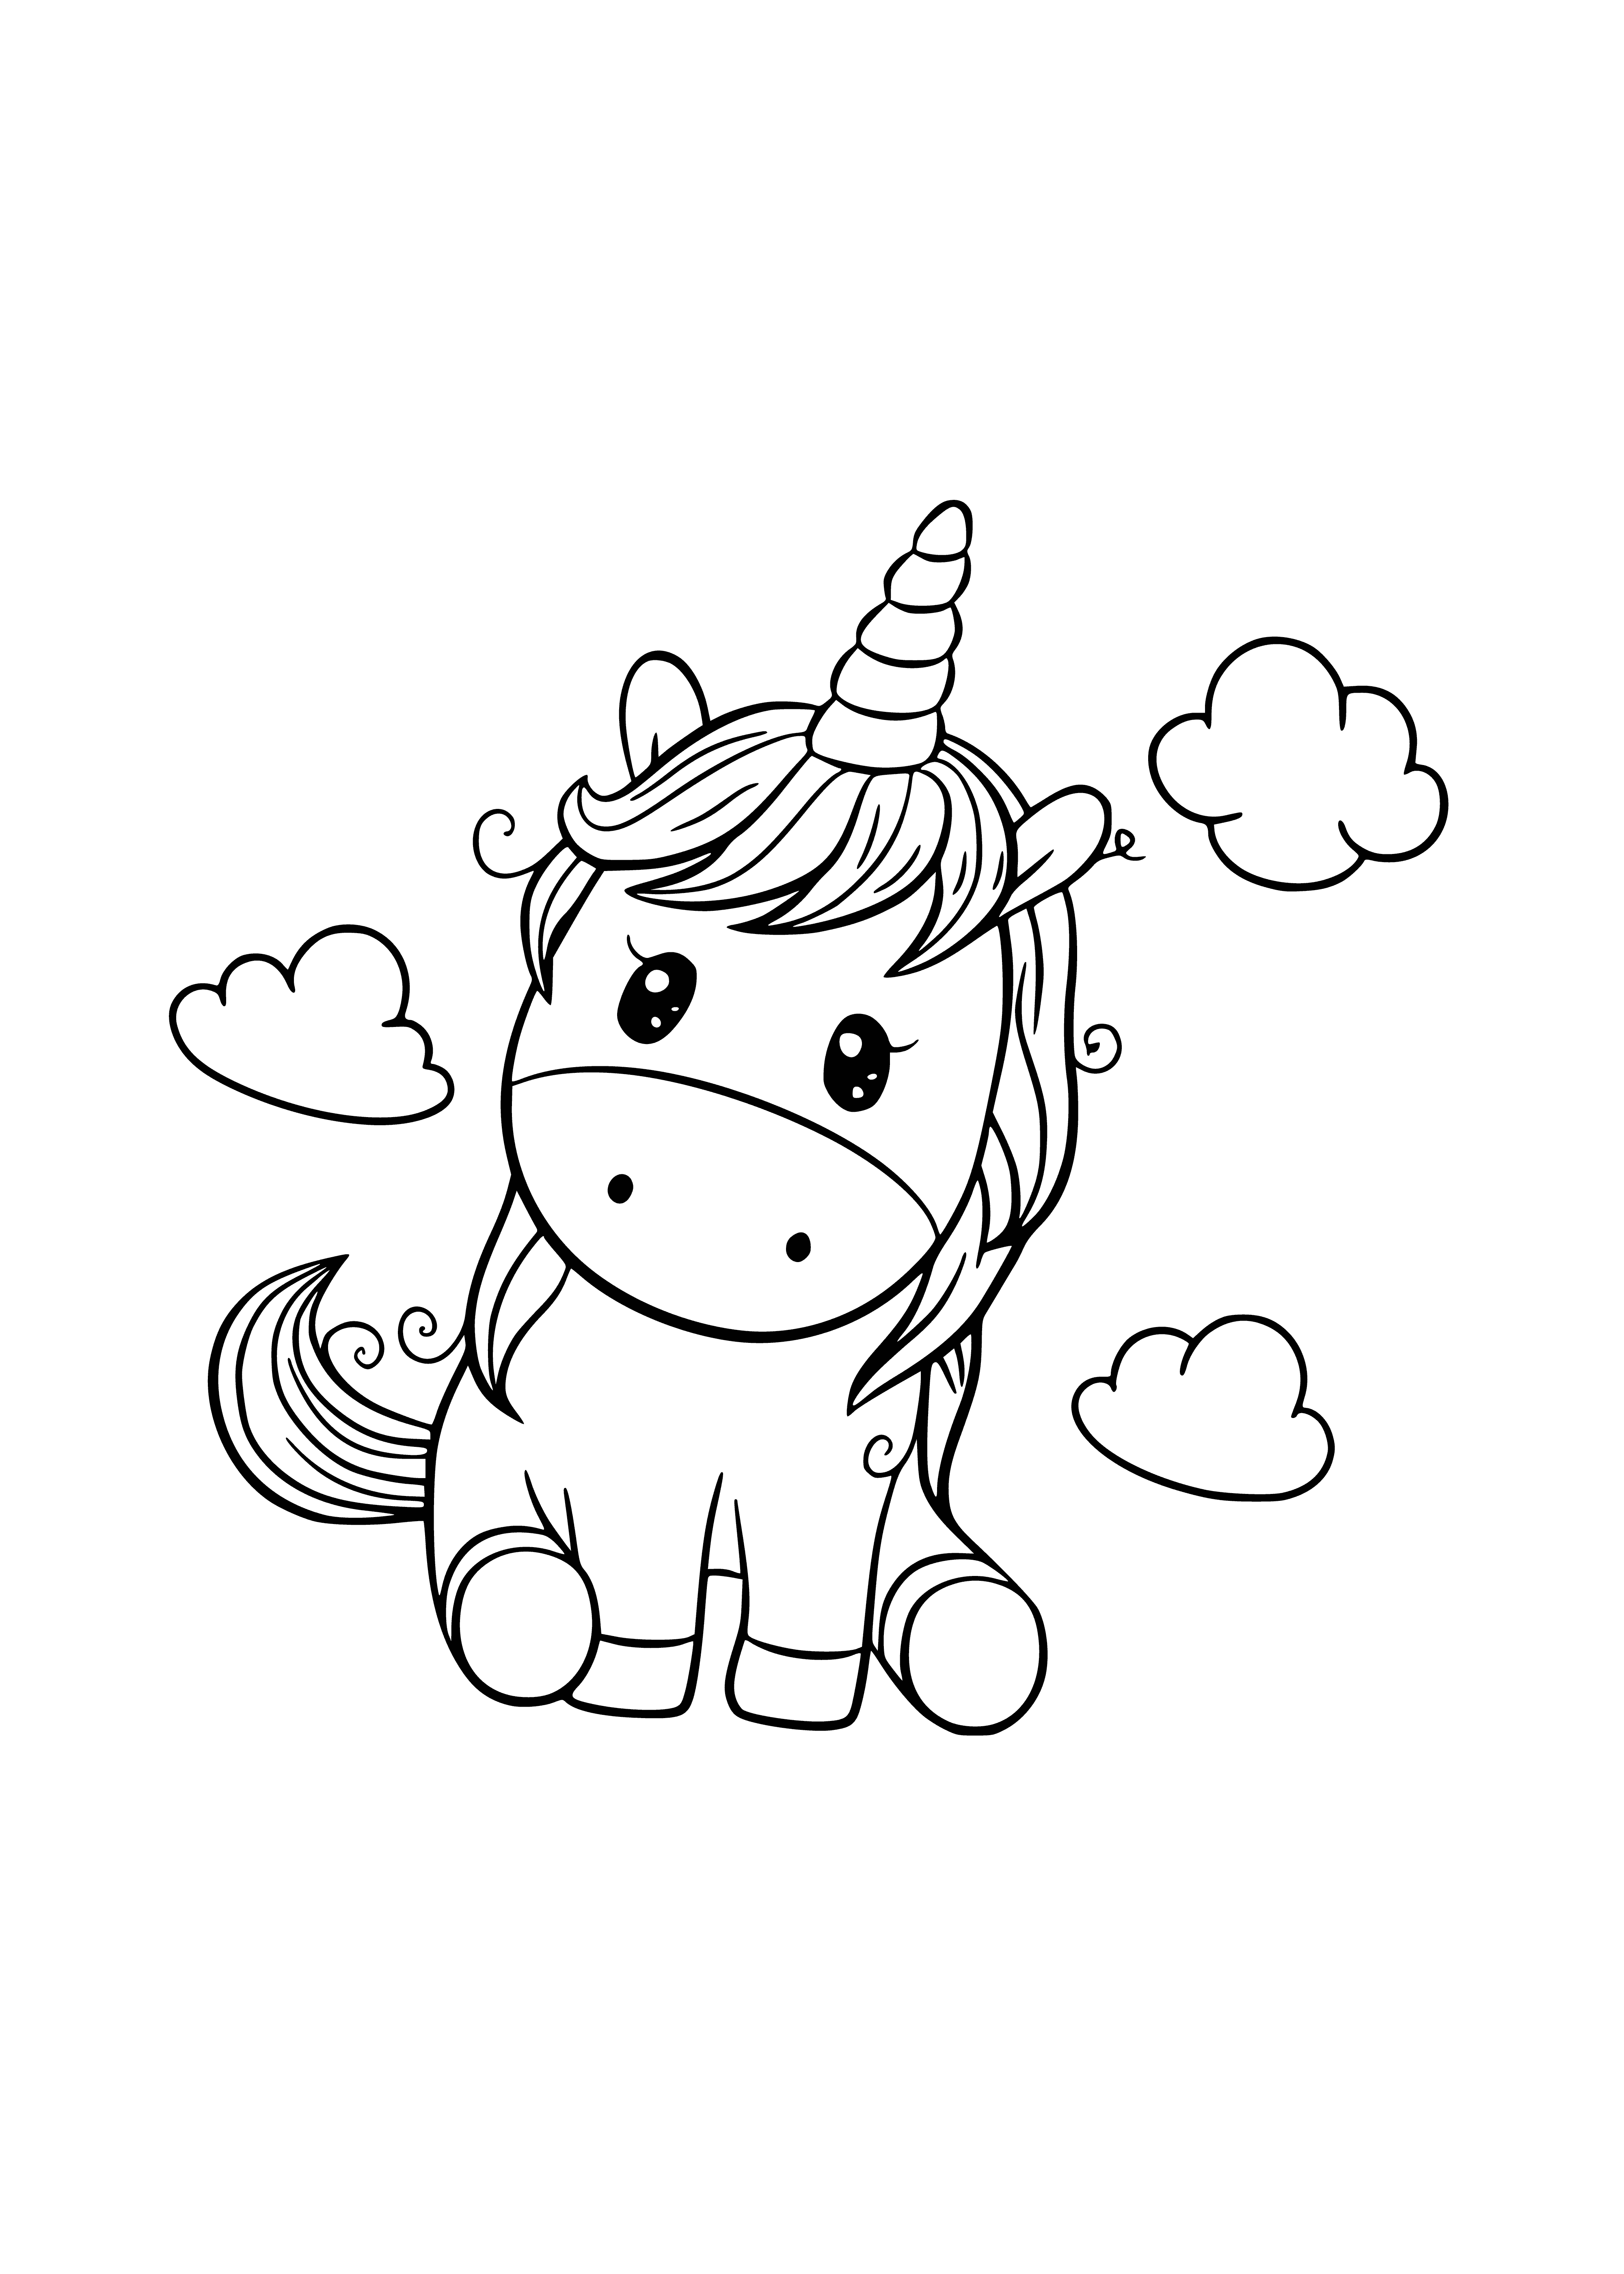 Unicorn in the clouds coloring page